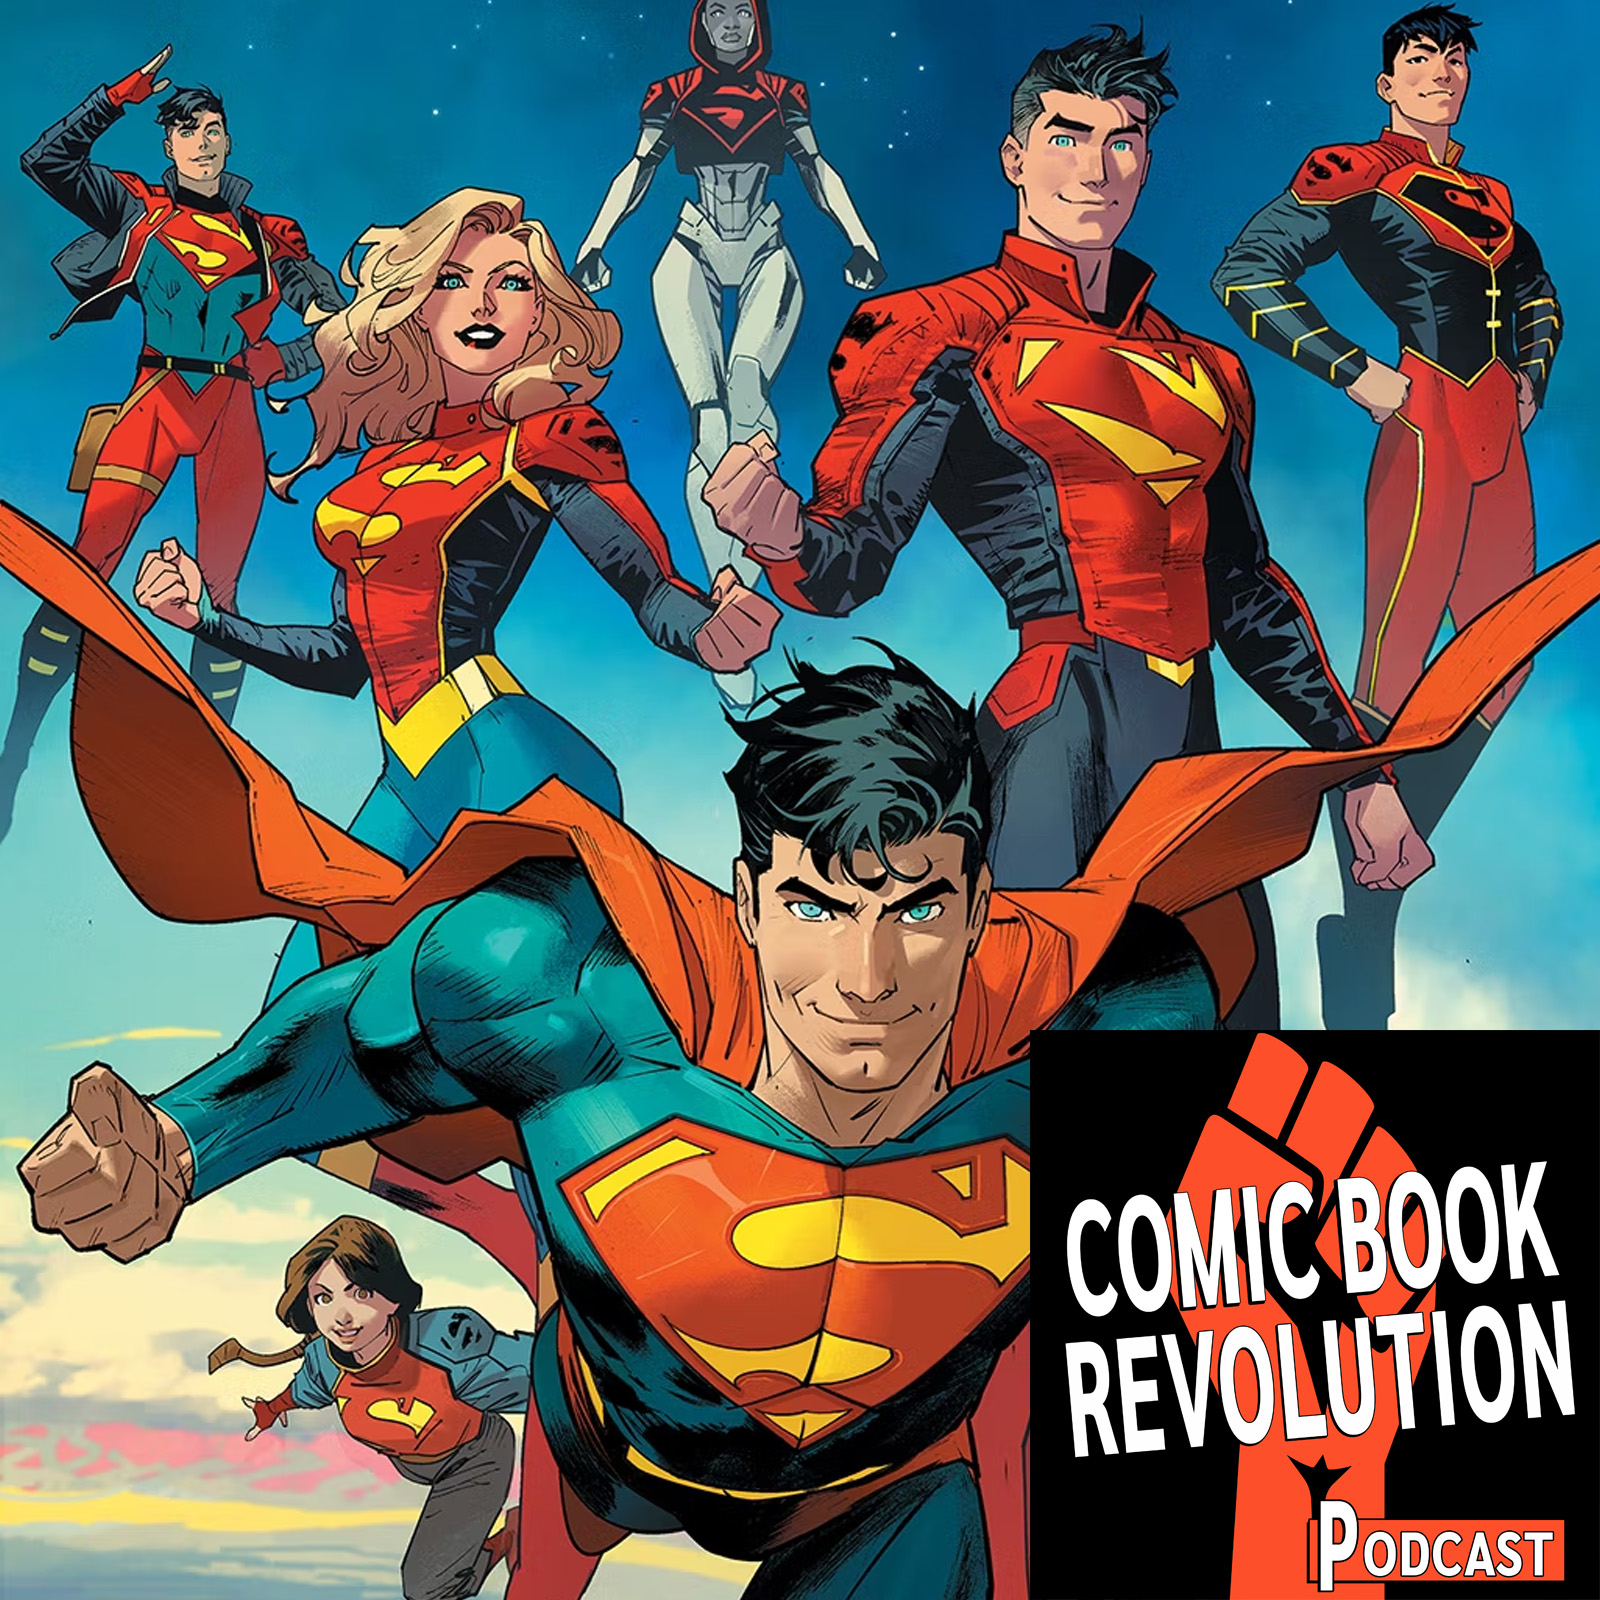 Action Comics #1051 And The New Direction For The Superman Franchise - Comic Book Revolution Podcast Ep. 103